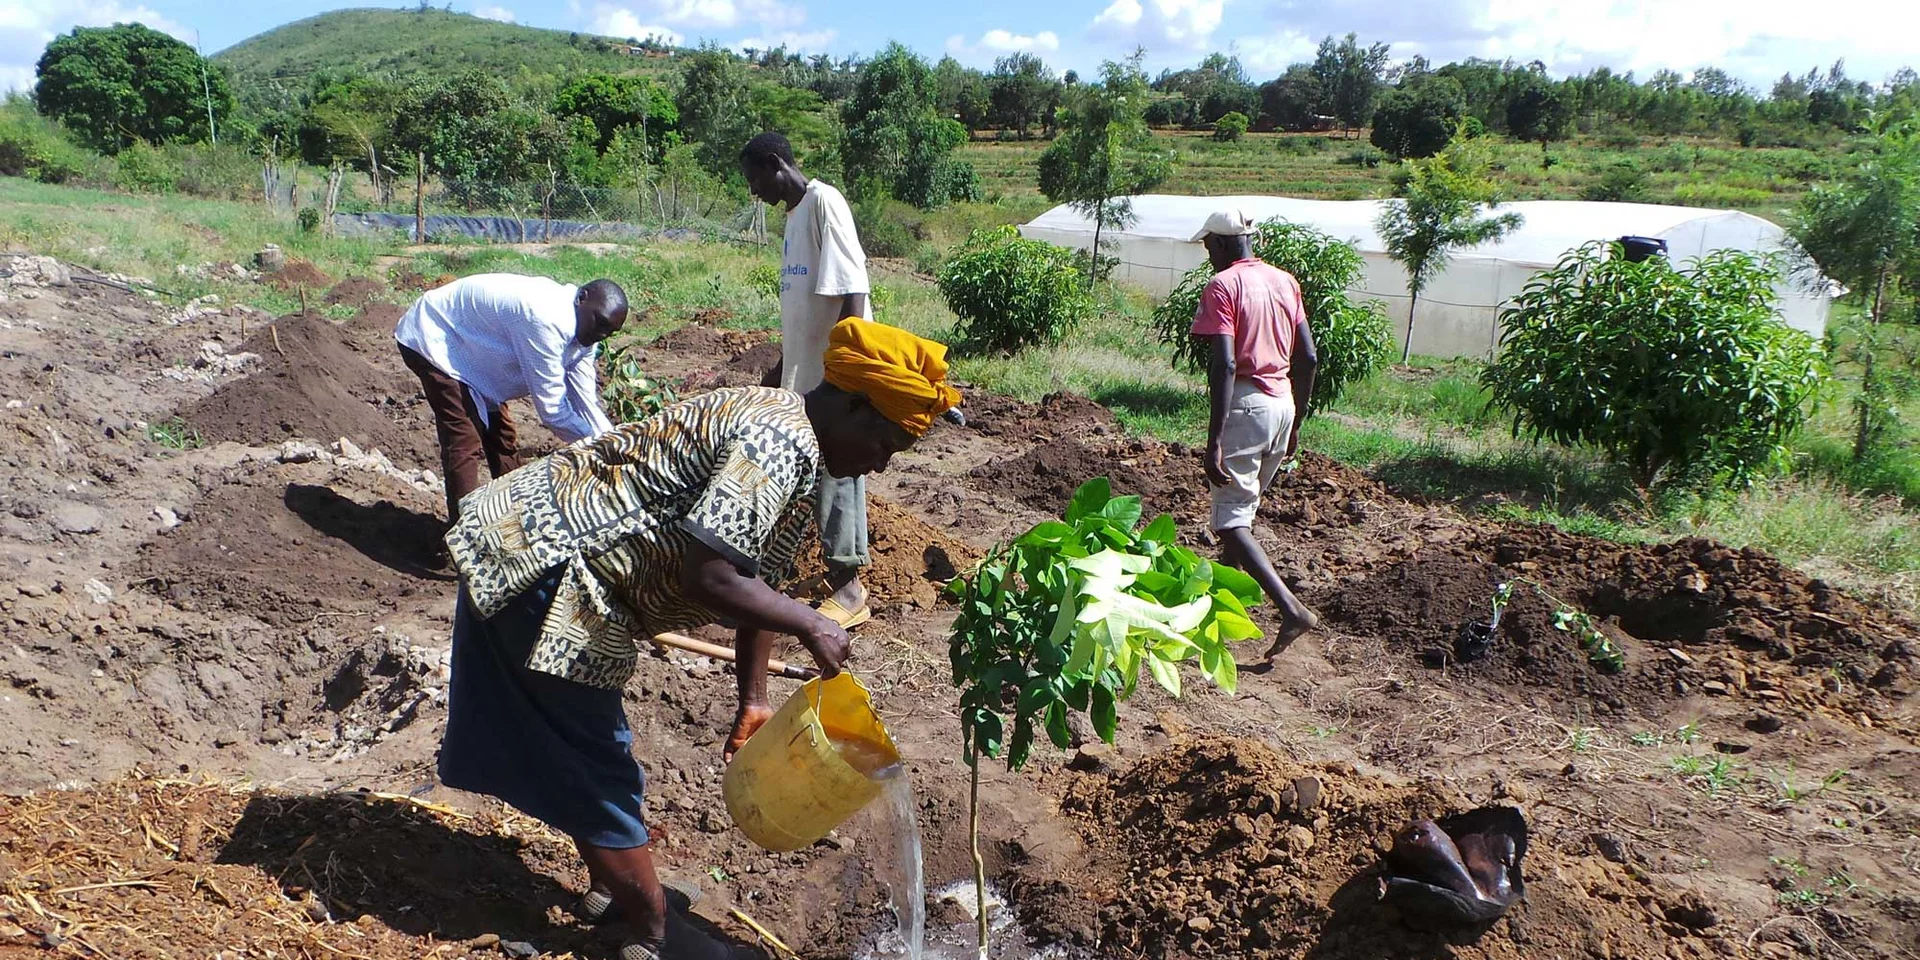 Creating an enabling environment for nature-based solutions to climate change